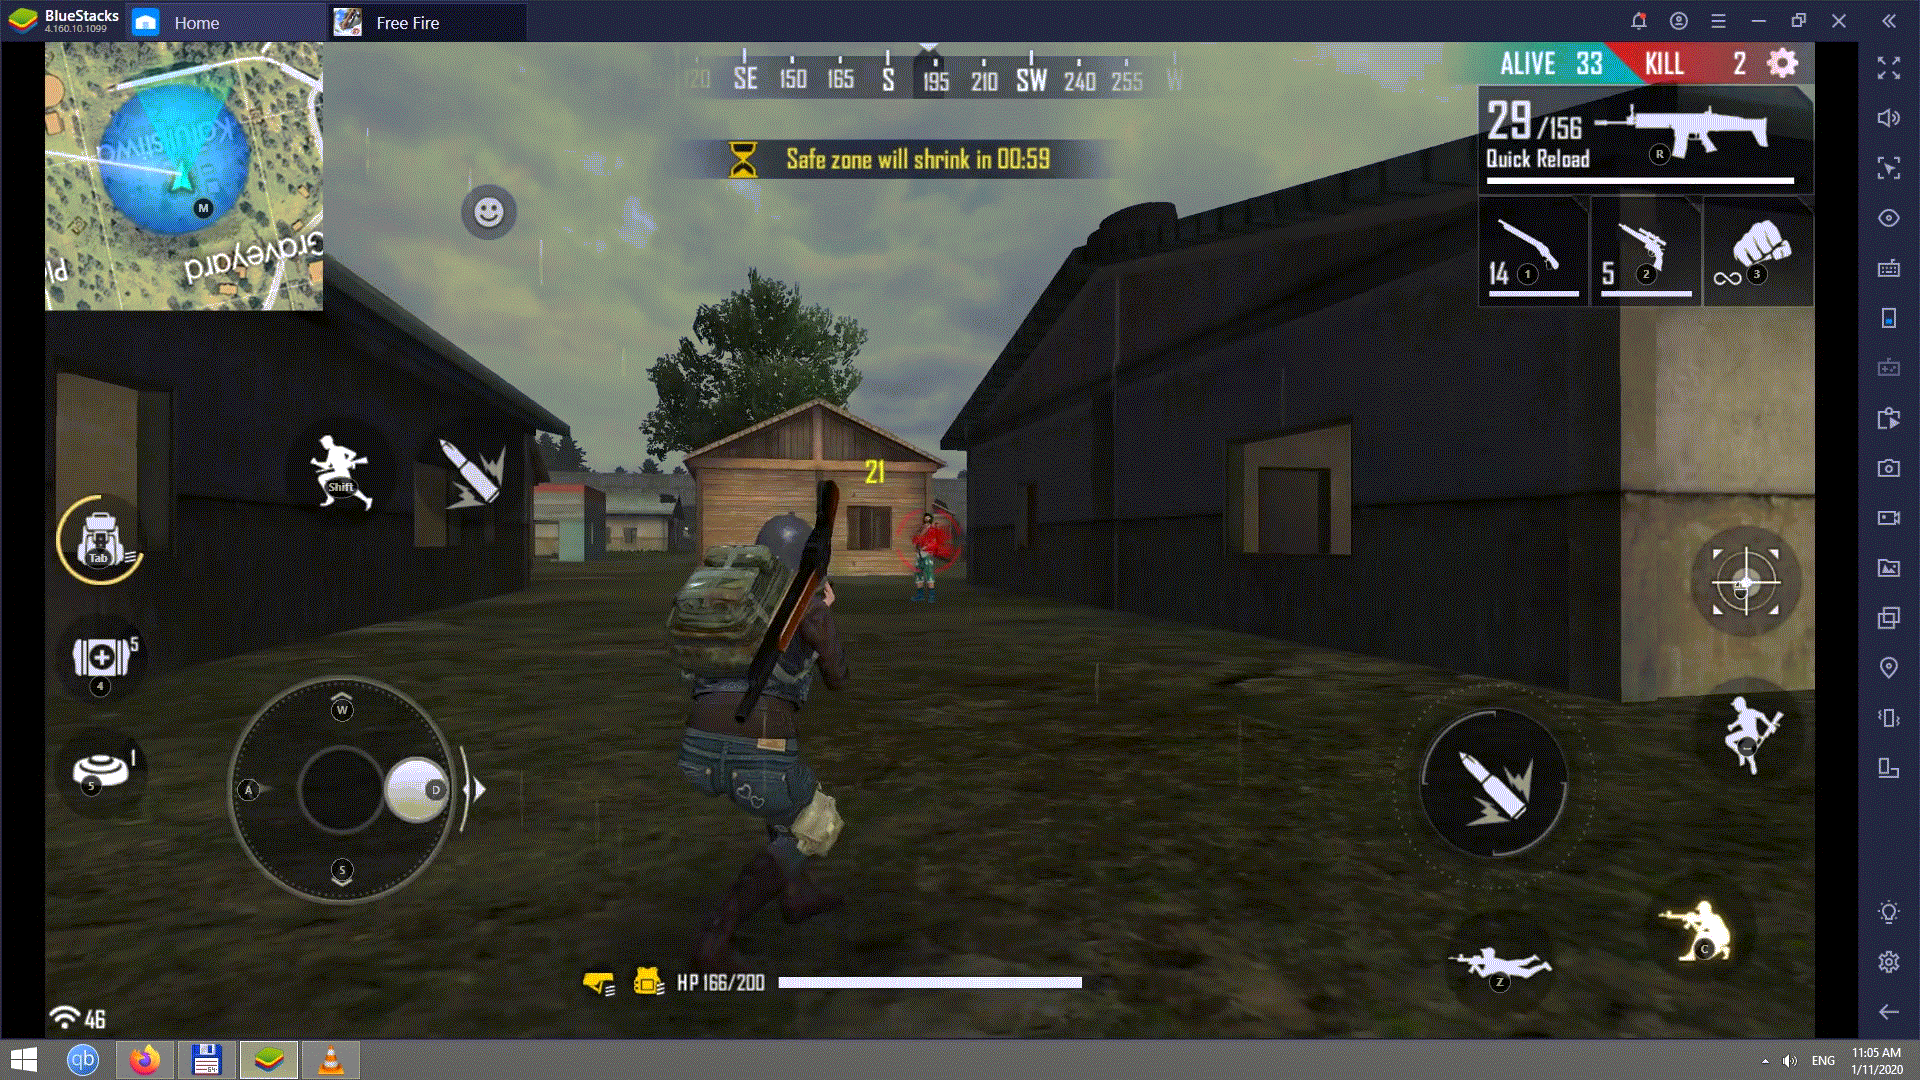 The New And Improved Smart Controls Feature For Free Fire And Call Of Duty Mobile On Pc Bluestacks